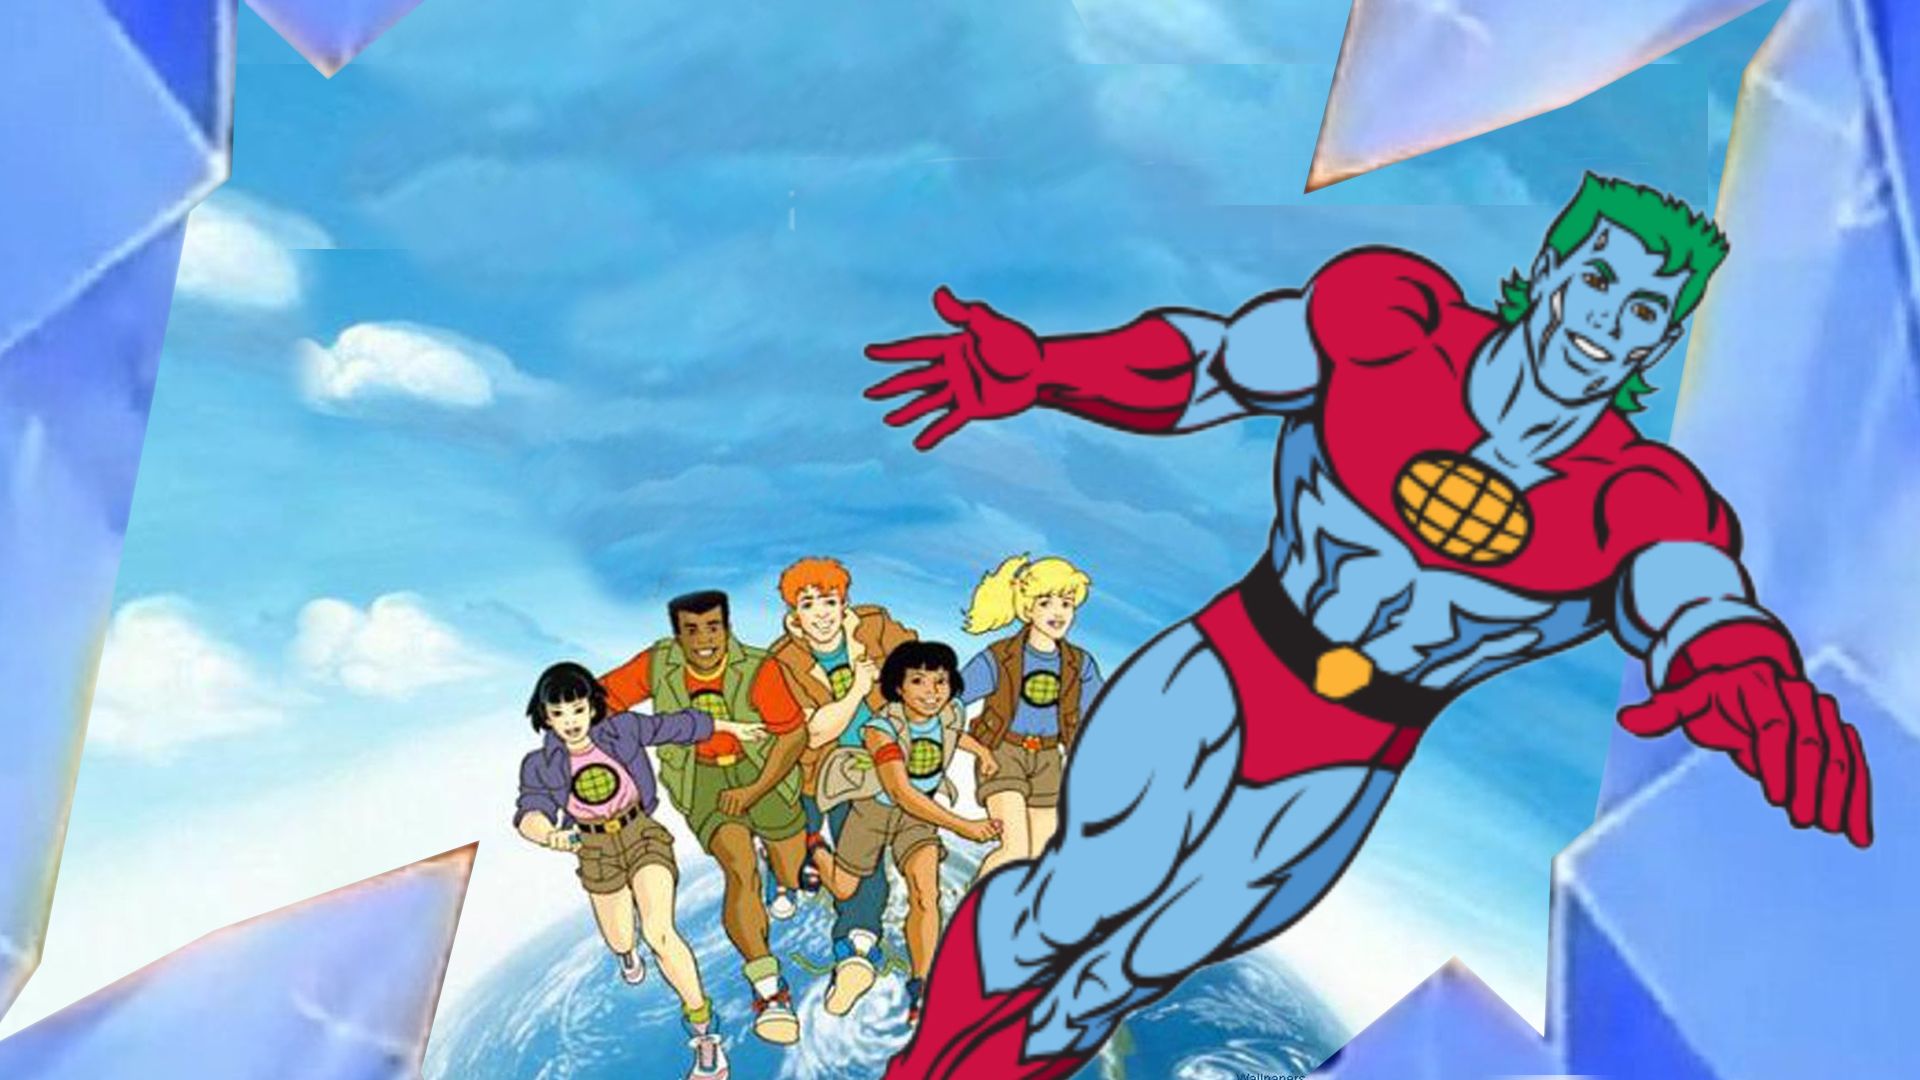 TBS's Captain Planet and the Planeteers